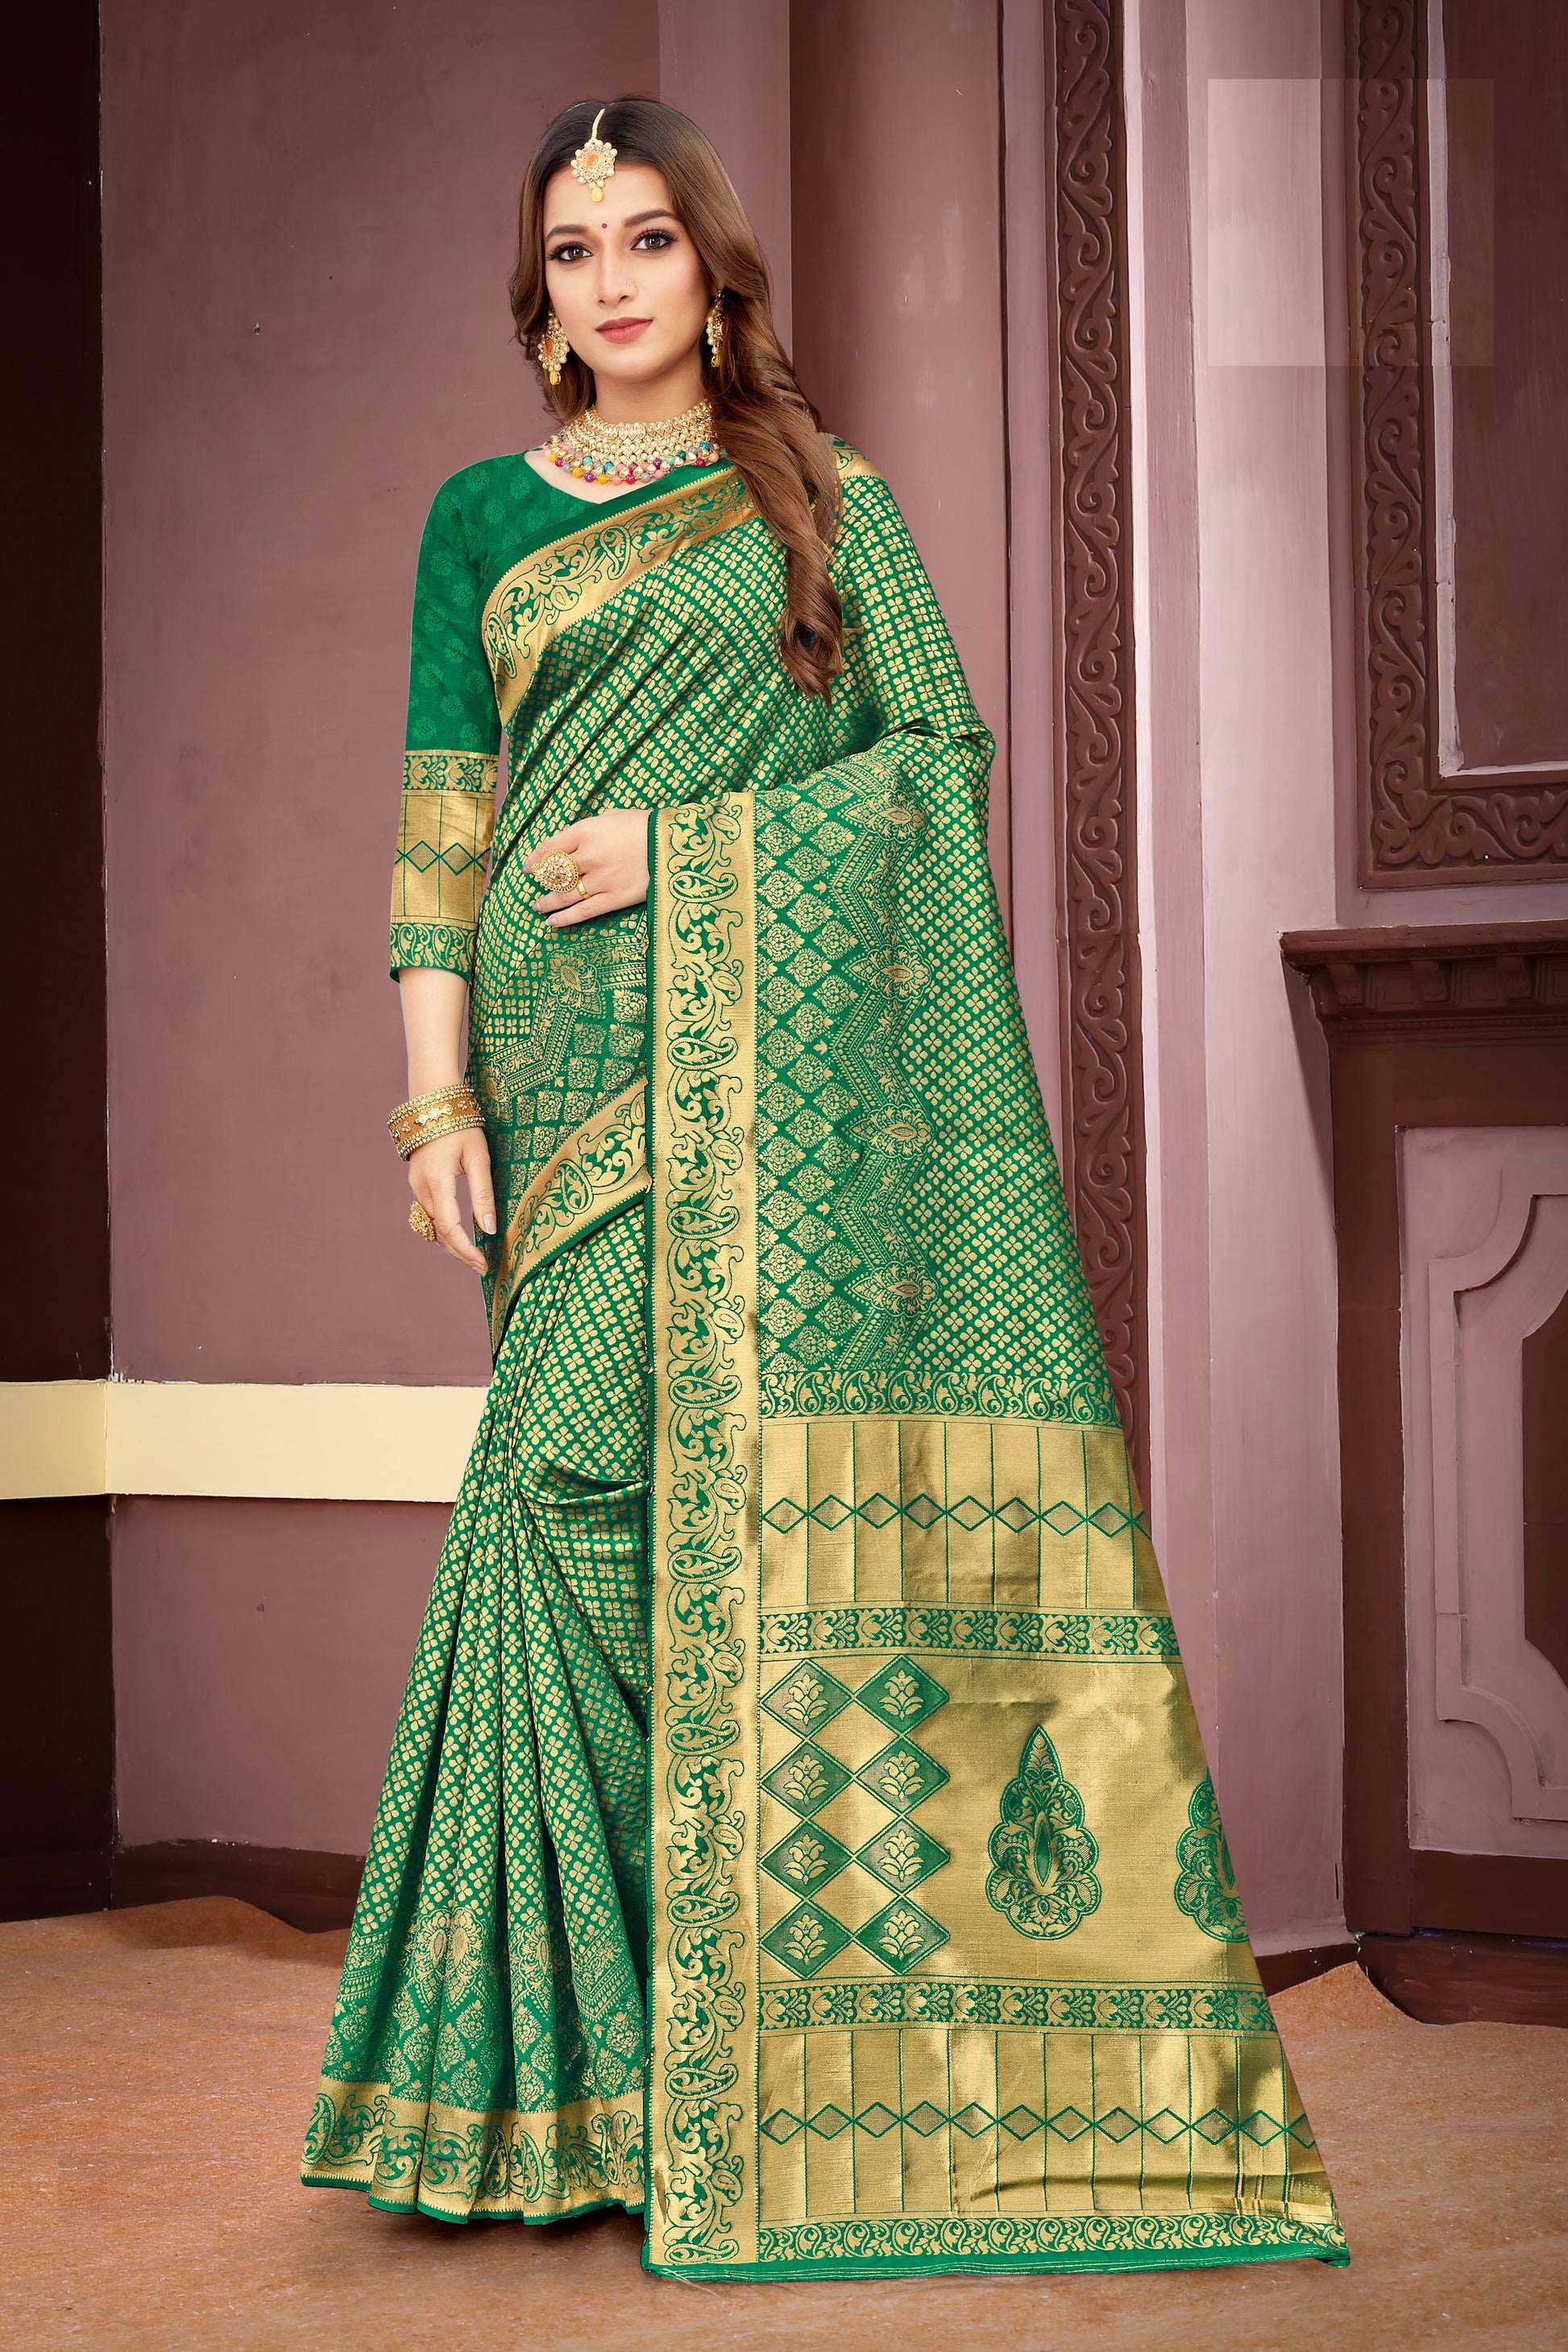 FASHION BOOMS GREEN BANARSI SILK TRADITIONAL SAREE WITH 7 OTHER COLORS FOR WHOLE FAMILY TO WEAR ON ANY OCCASION .